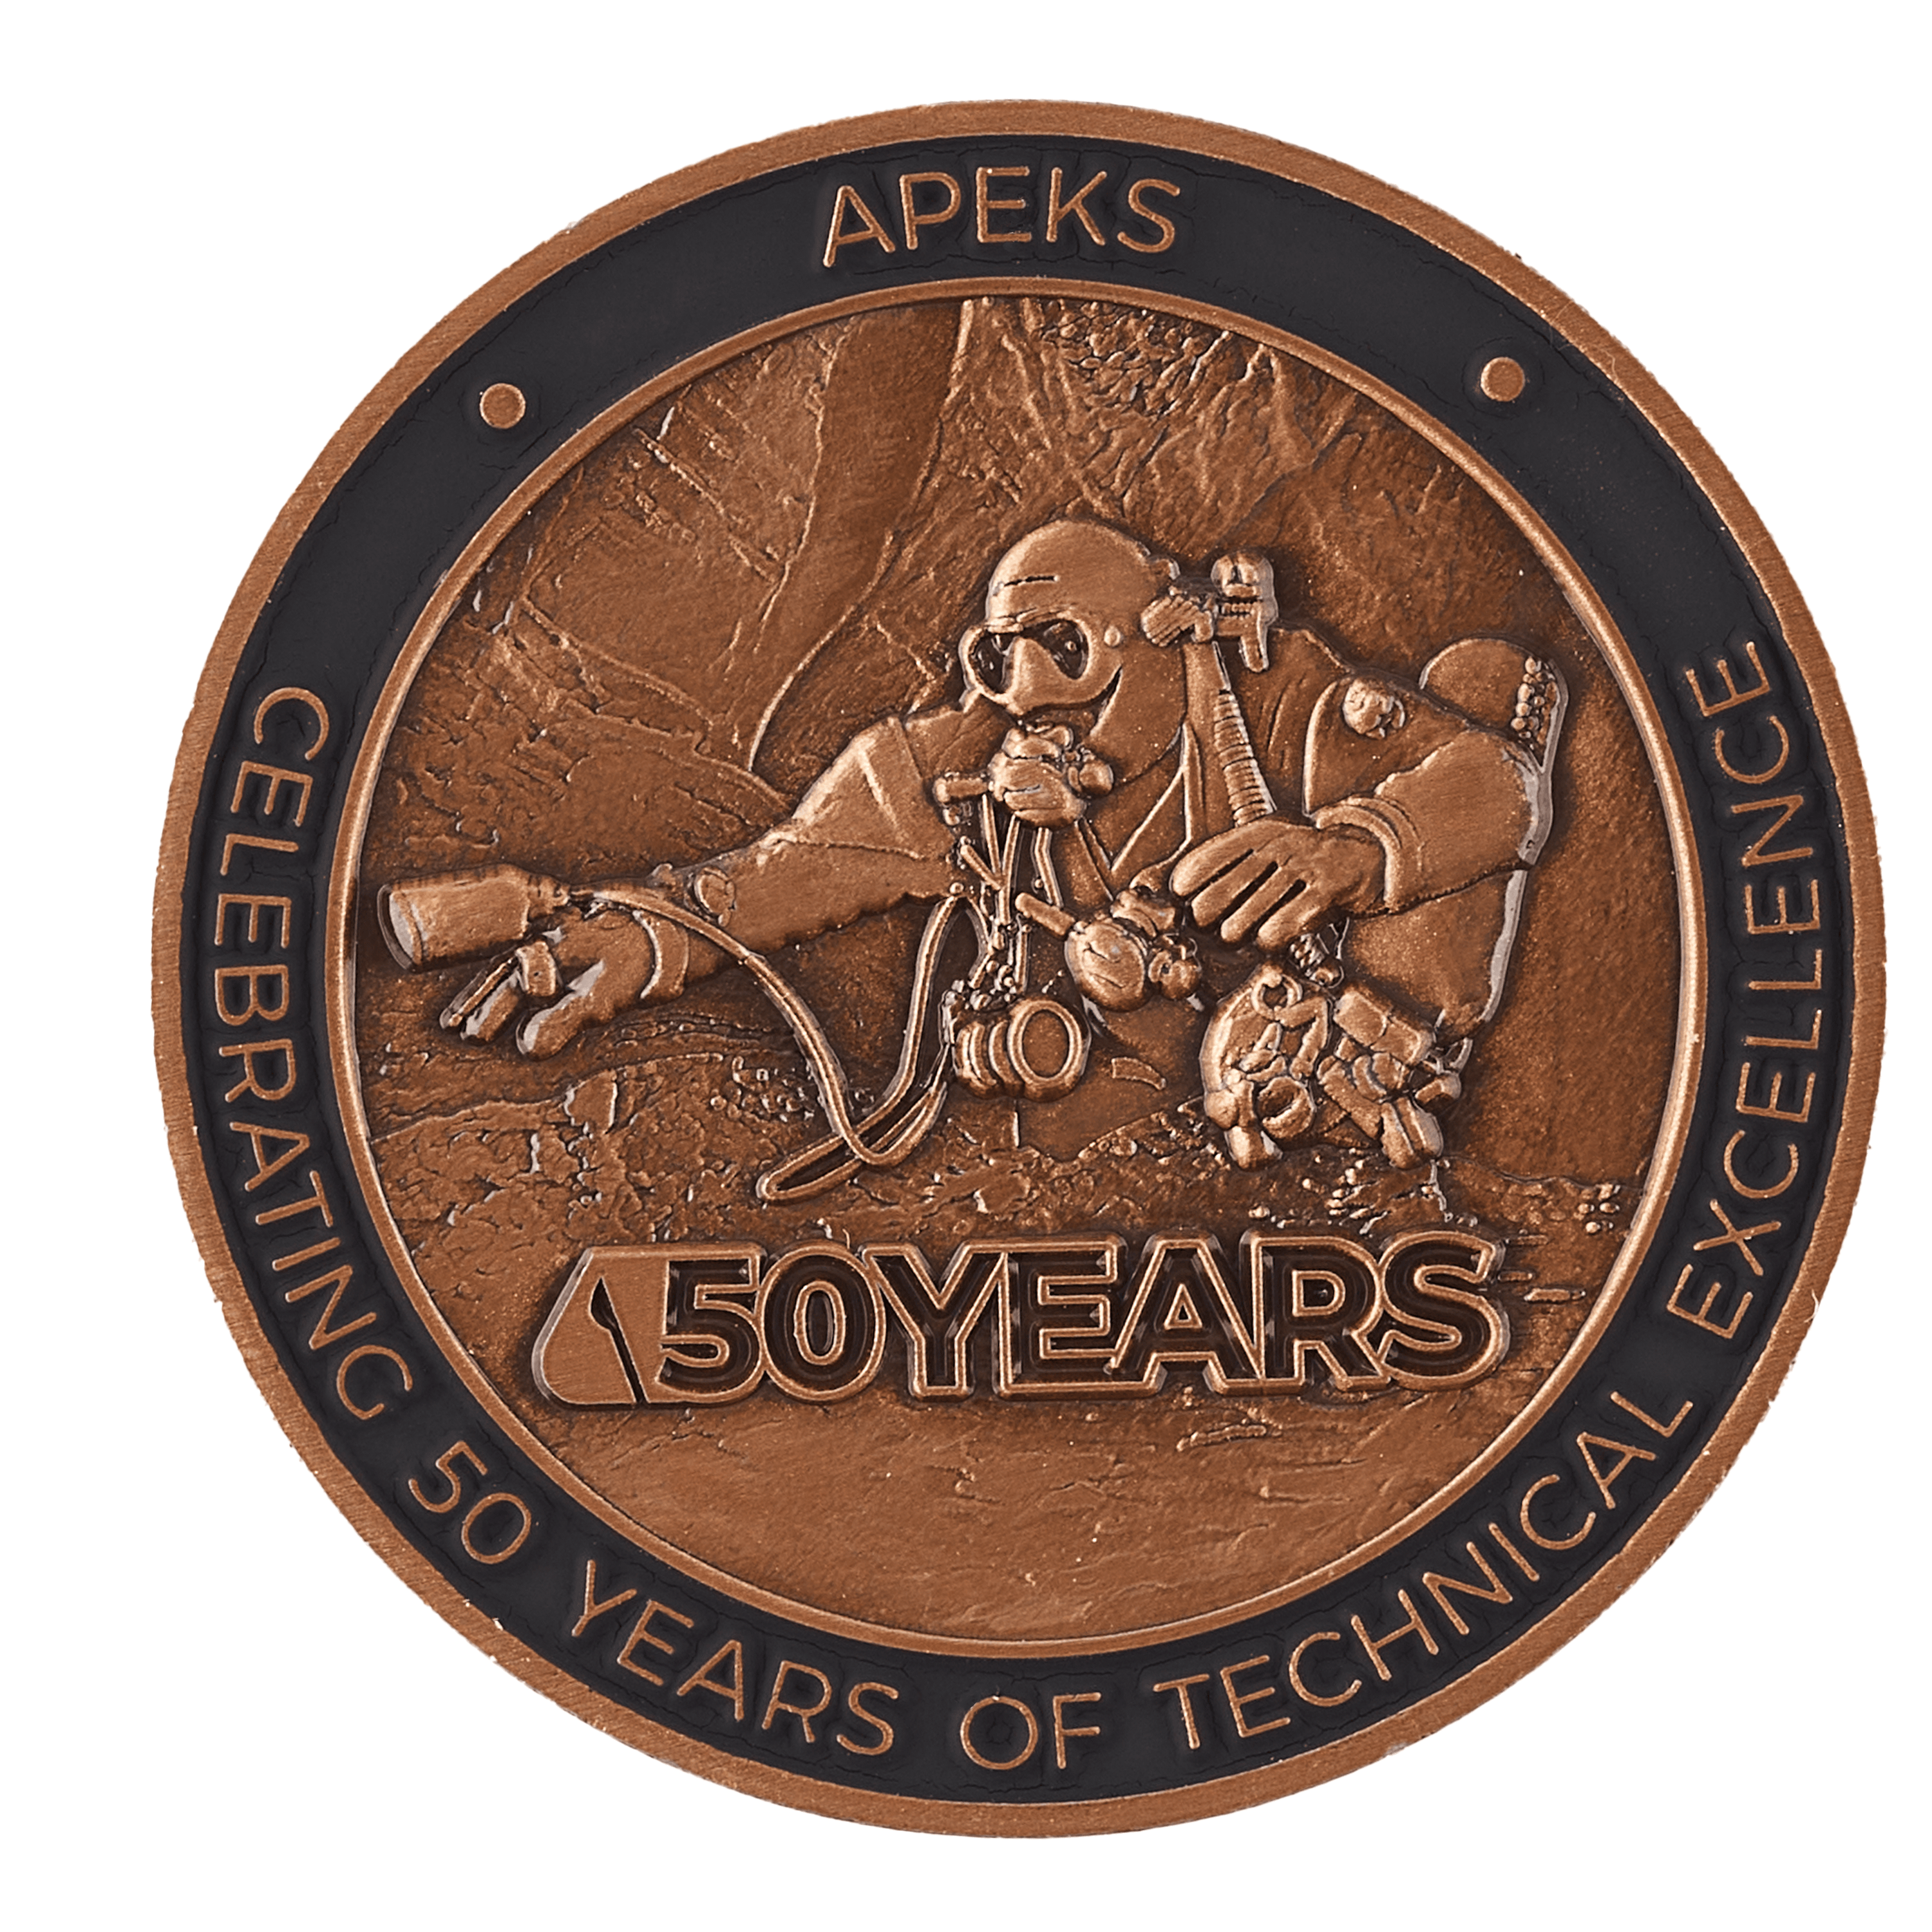 Apeks Apeks MTX-RC 50th Anniversary Limited Edition Regulator by Oyster Diving Shop